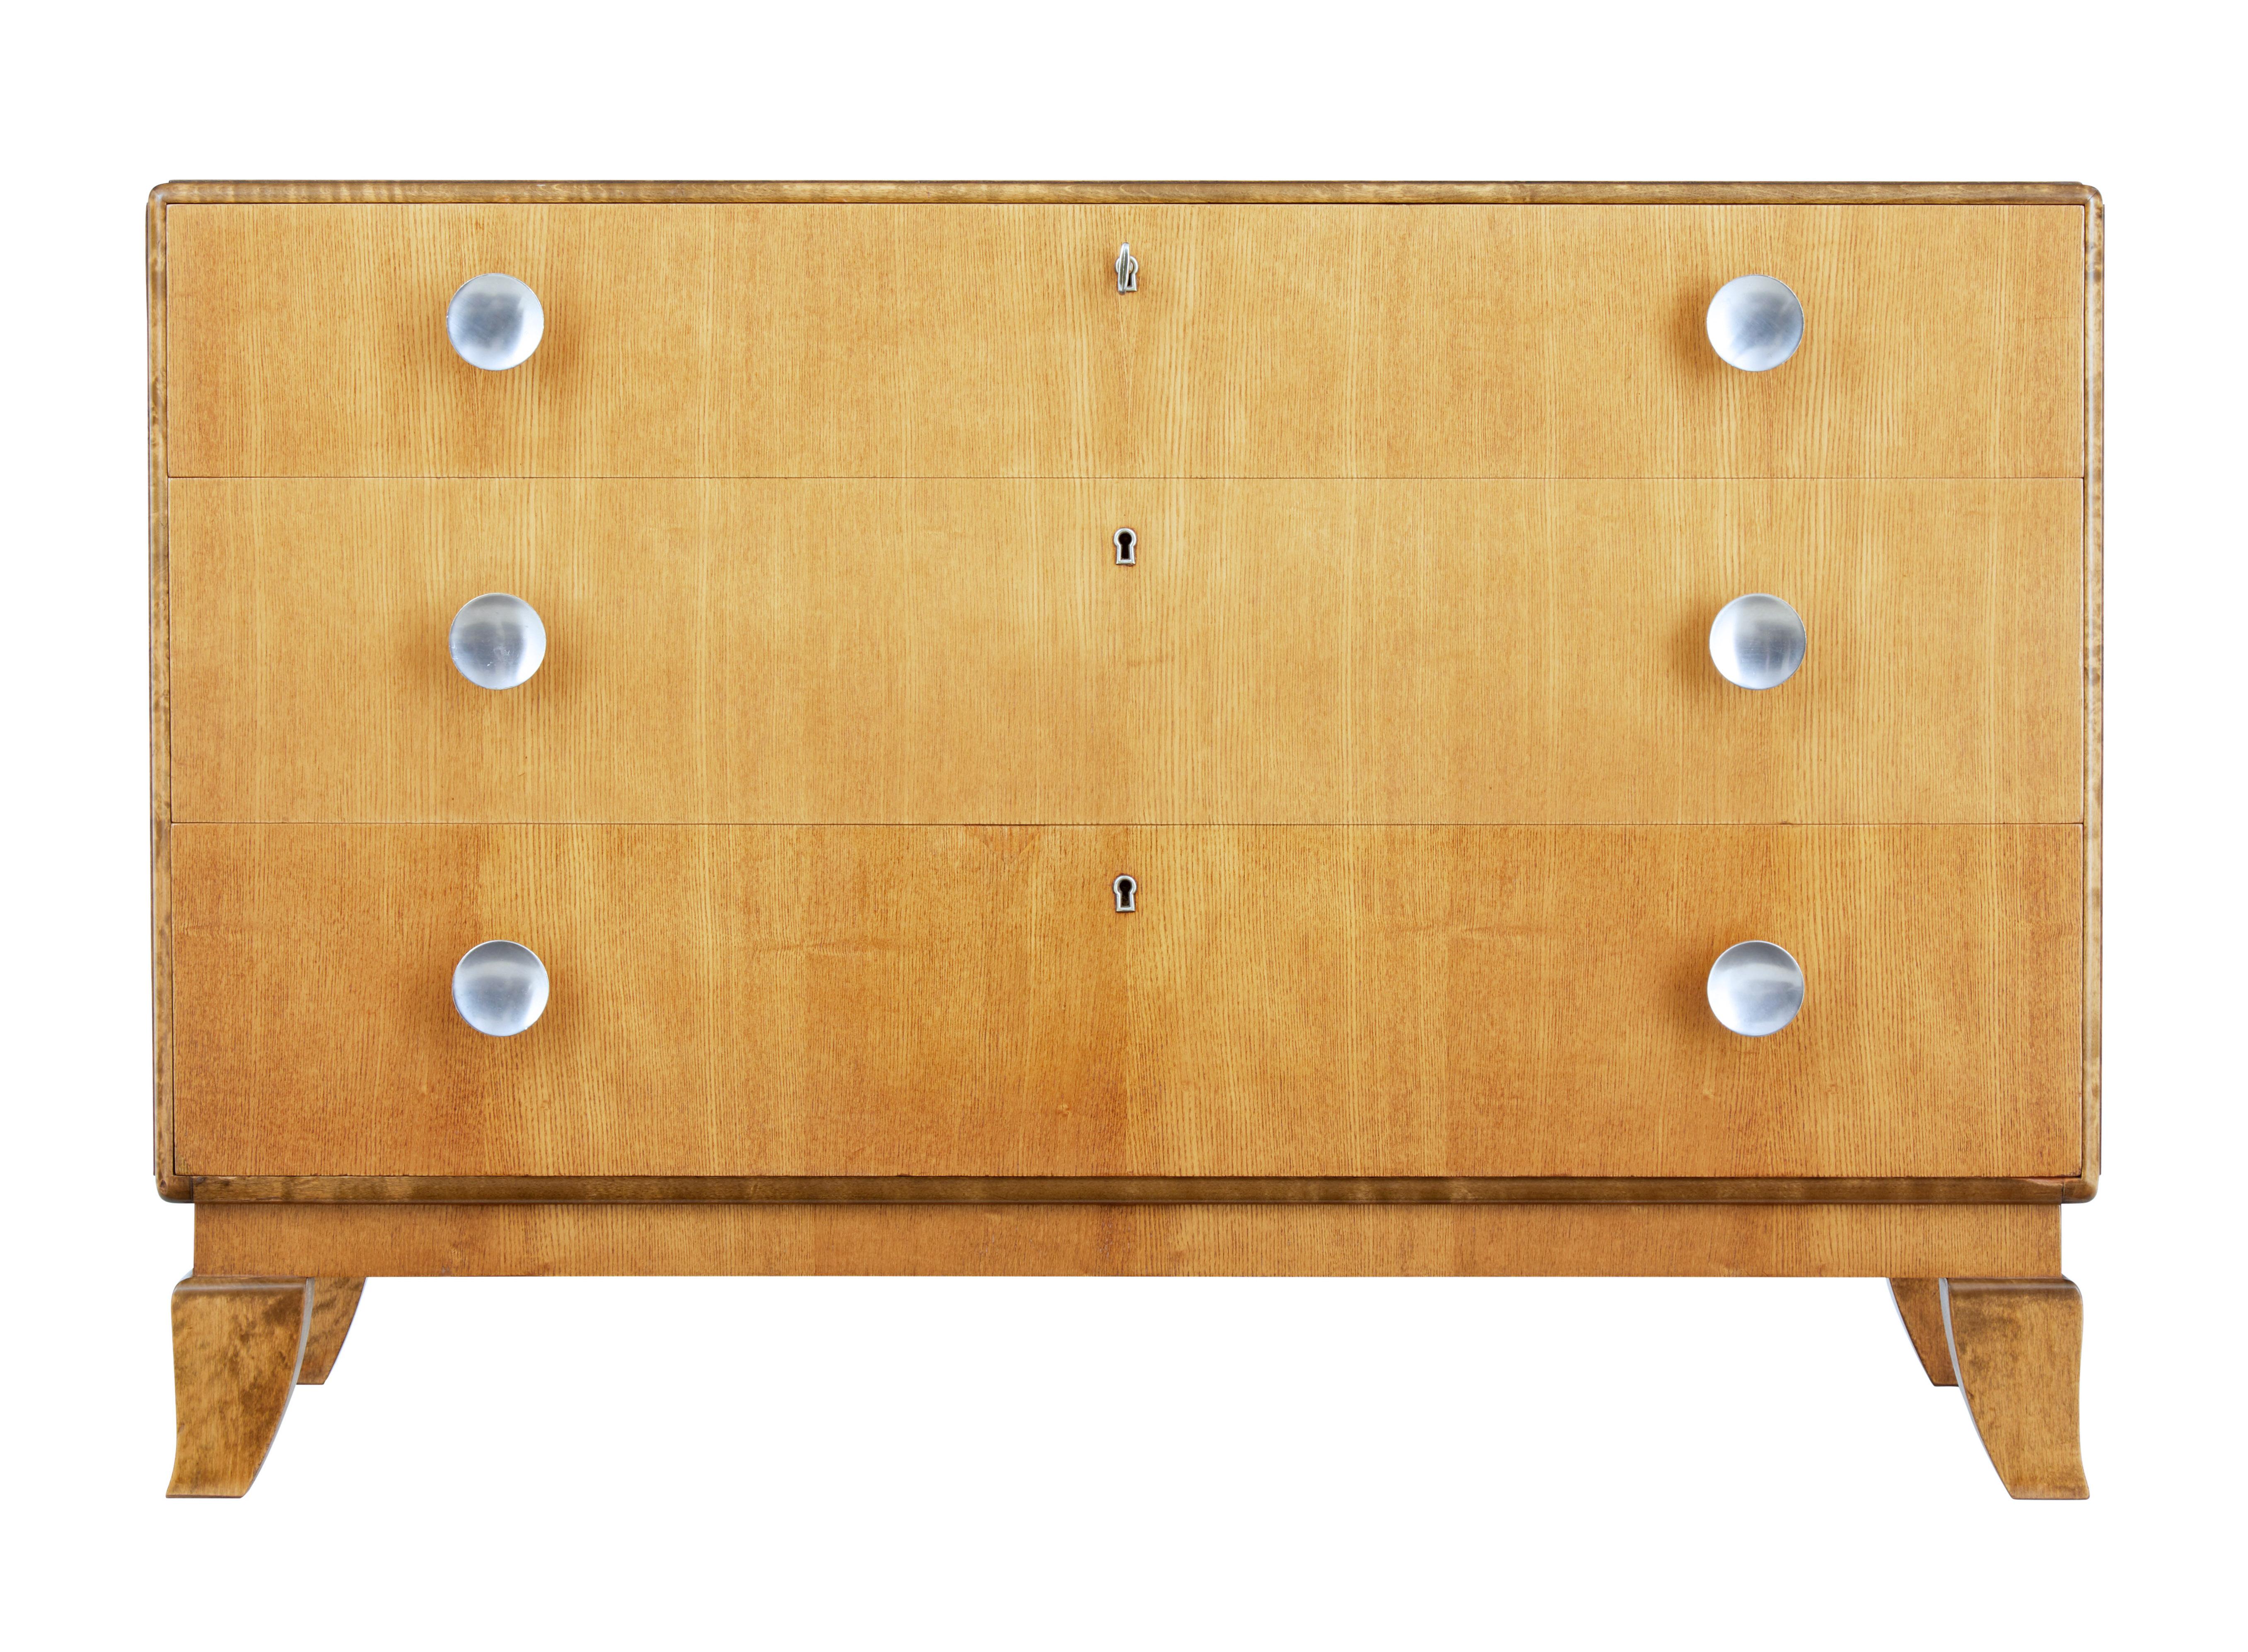 Mid-20th century Scandinavian elm and birch chest of drawers, circa 1950.

Very stylish piece of Scandinavian design. Dark birch outer frame which contrasts with elm.

3 graduating drawers with key and locks, brushed steel handles, standing on